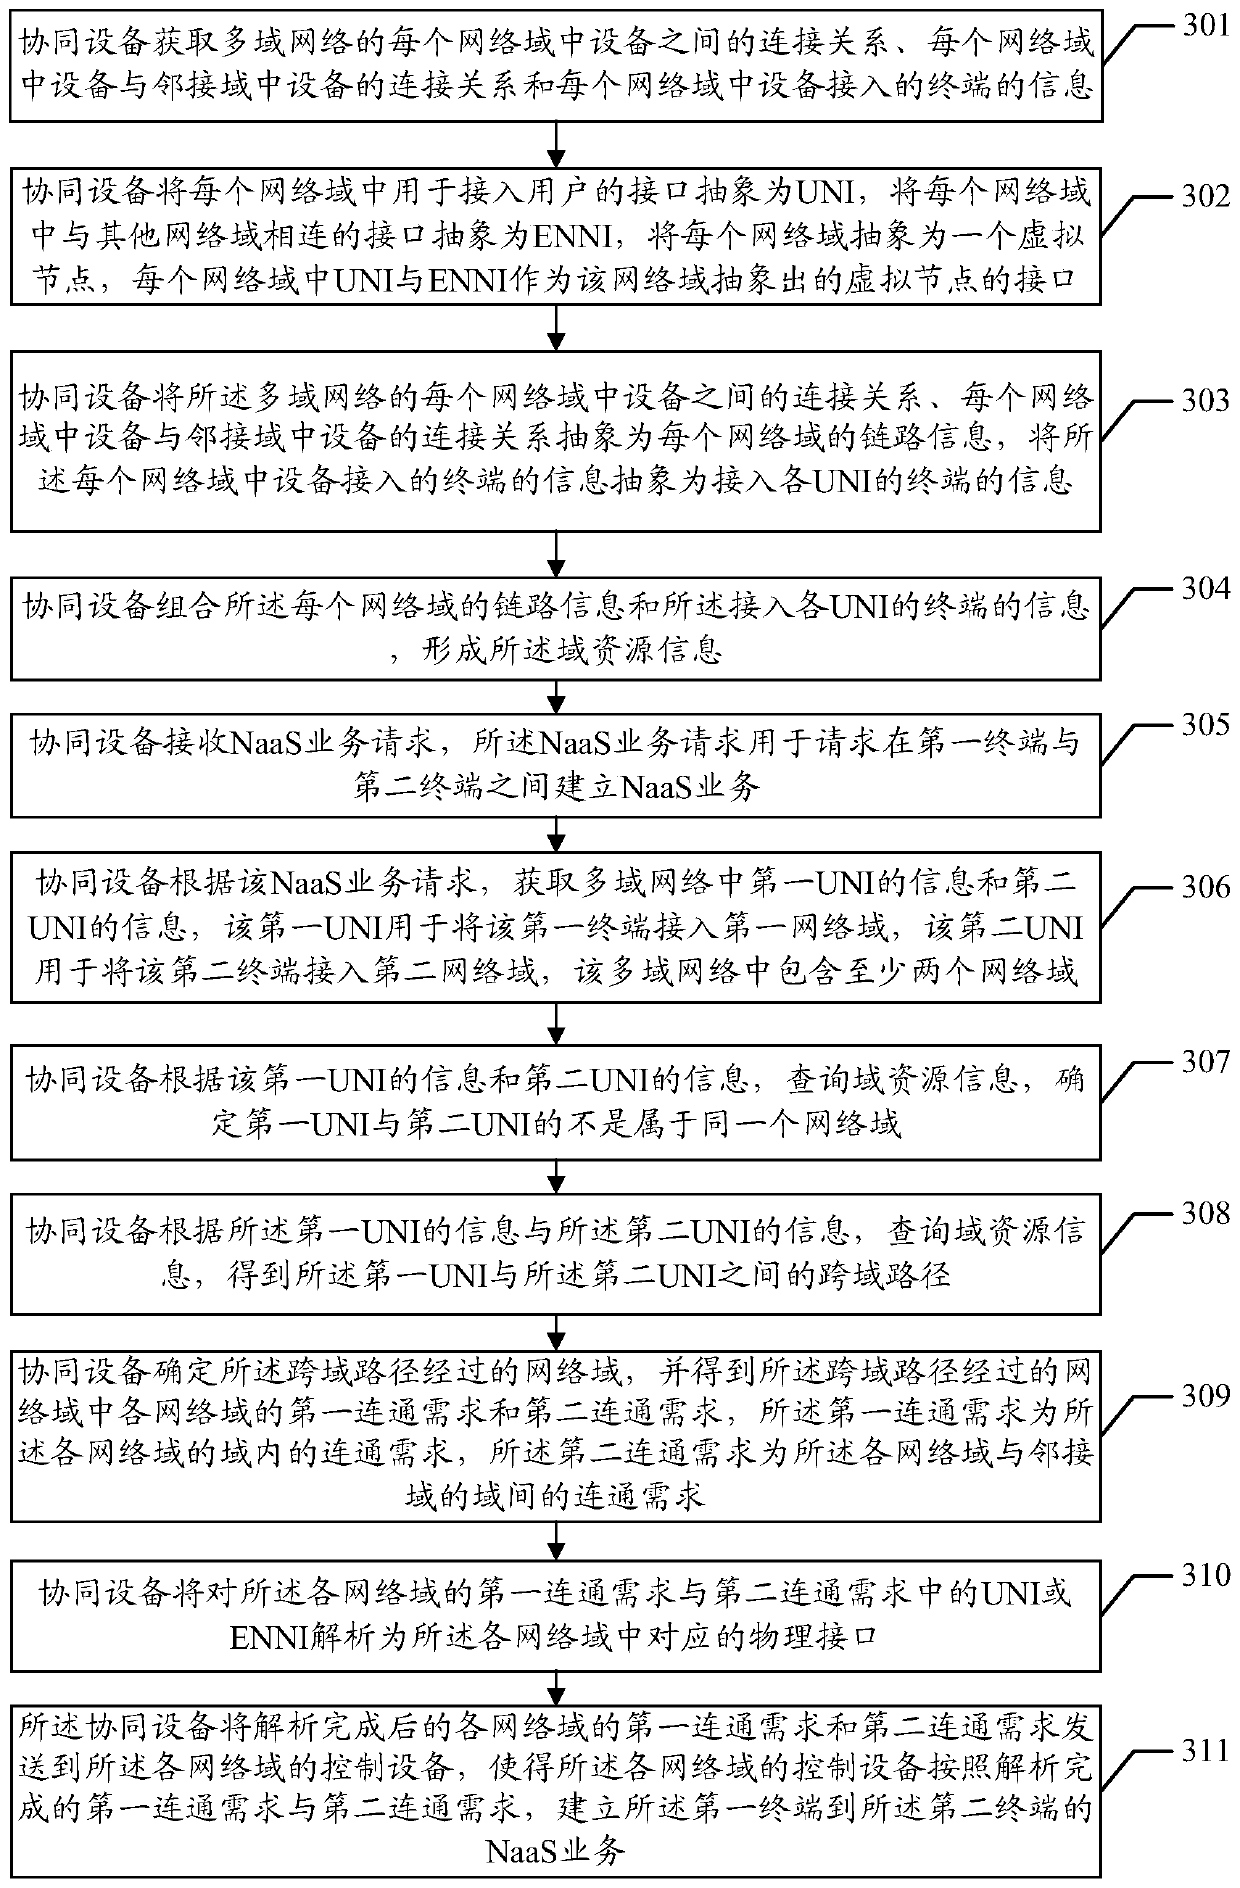 Network-as-a-service business cross-domain collaboration method, collaboration equipment, and control equipment